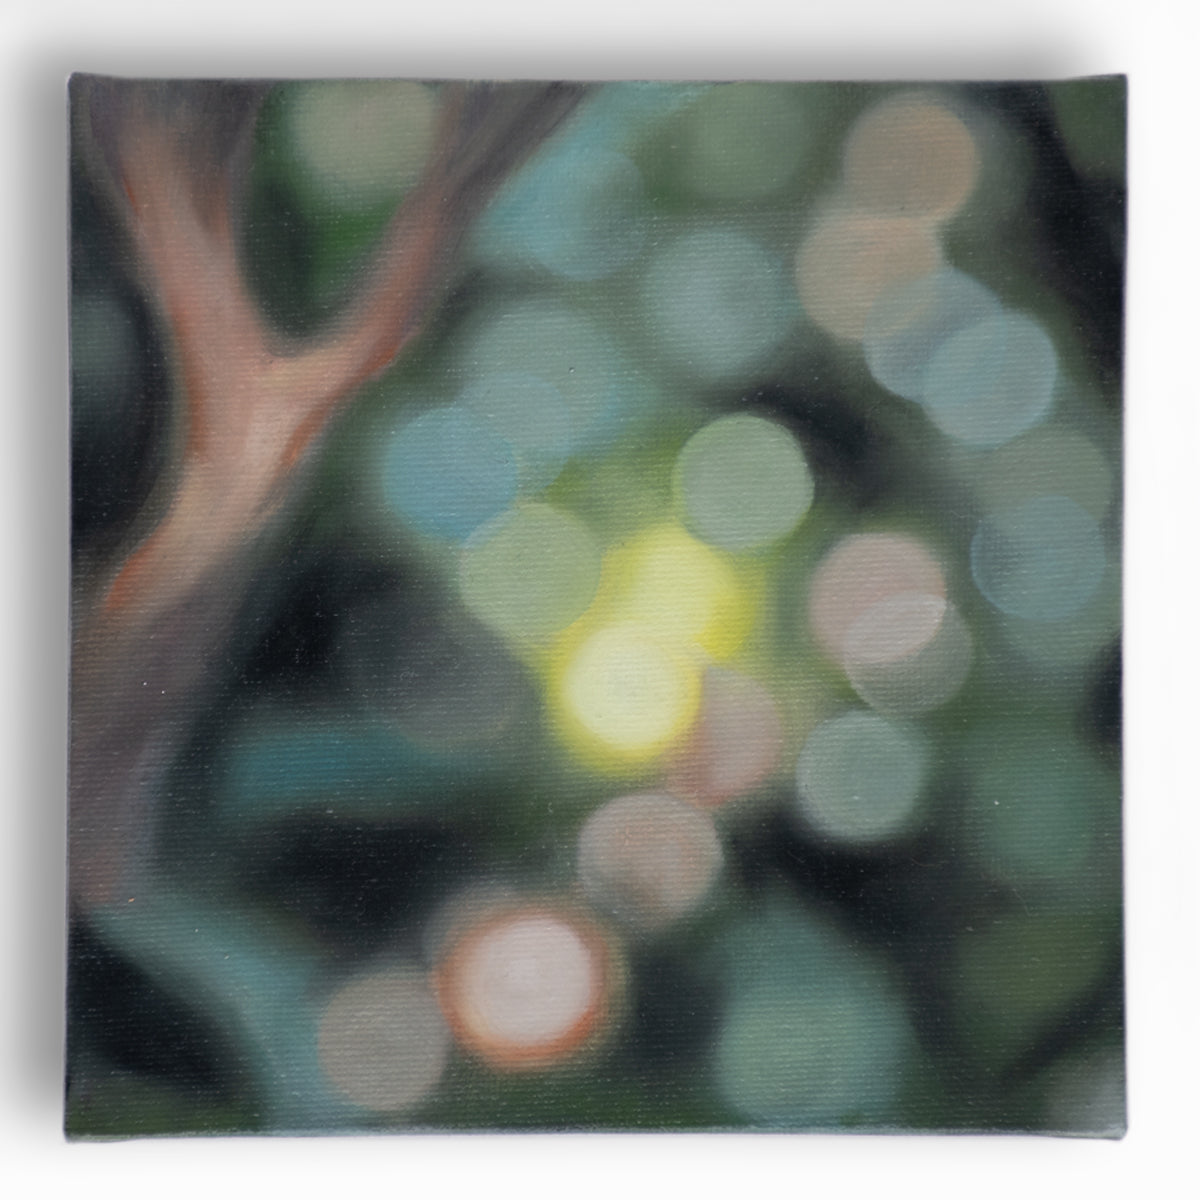 Wandering Within - Bokeh original oil painting on canvas